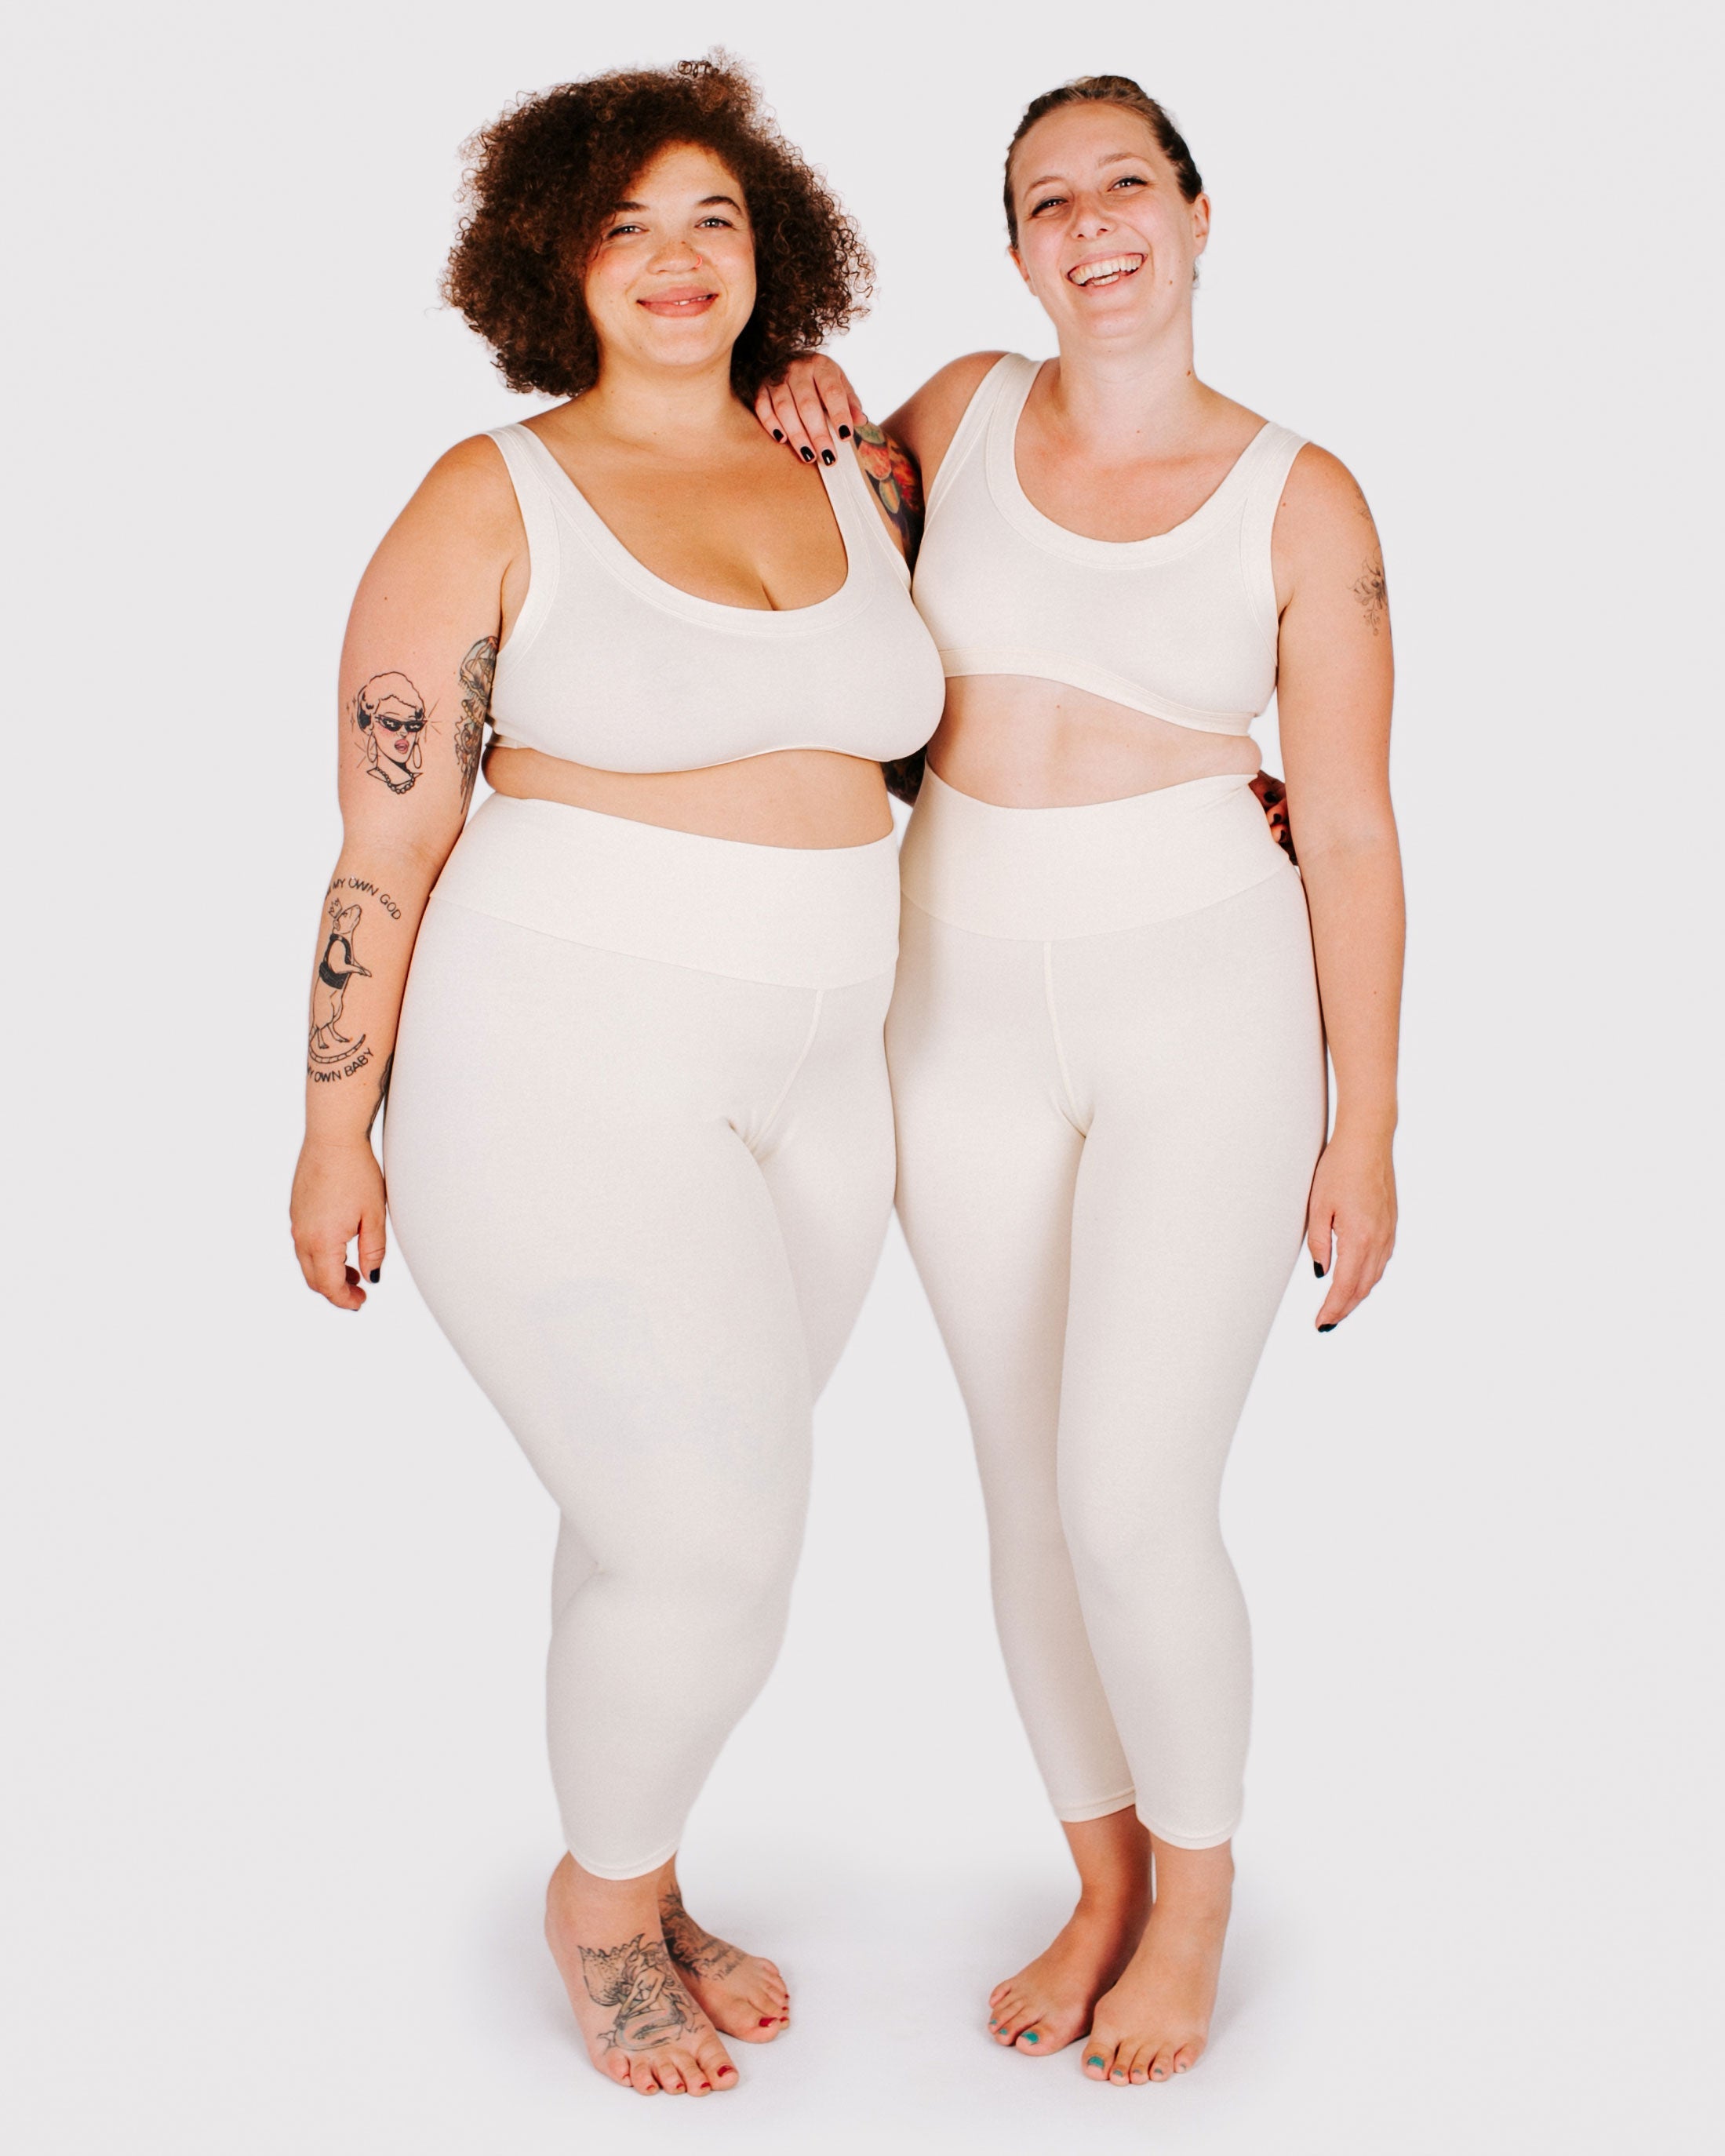 Fit photo from the front of Thunderpants organic cotton 3/4 Length Leggings and Bralettes in off-white on two models standing together.